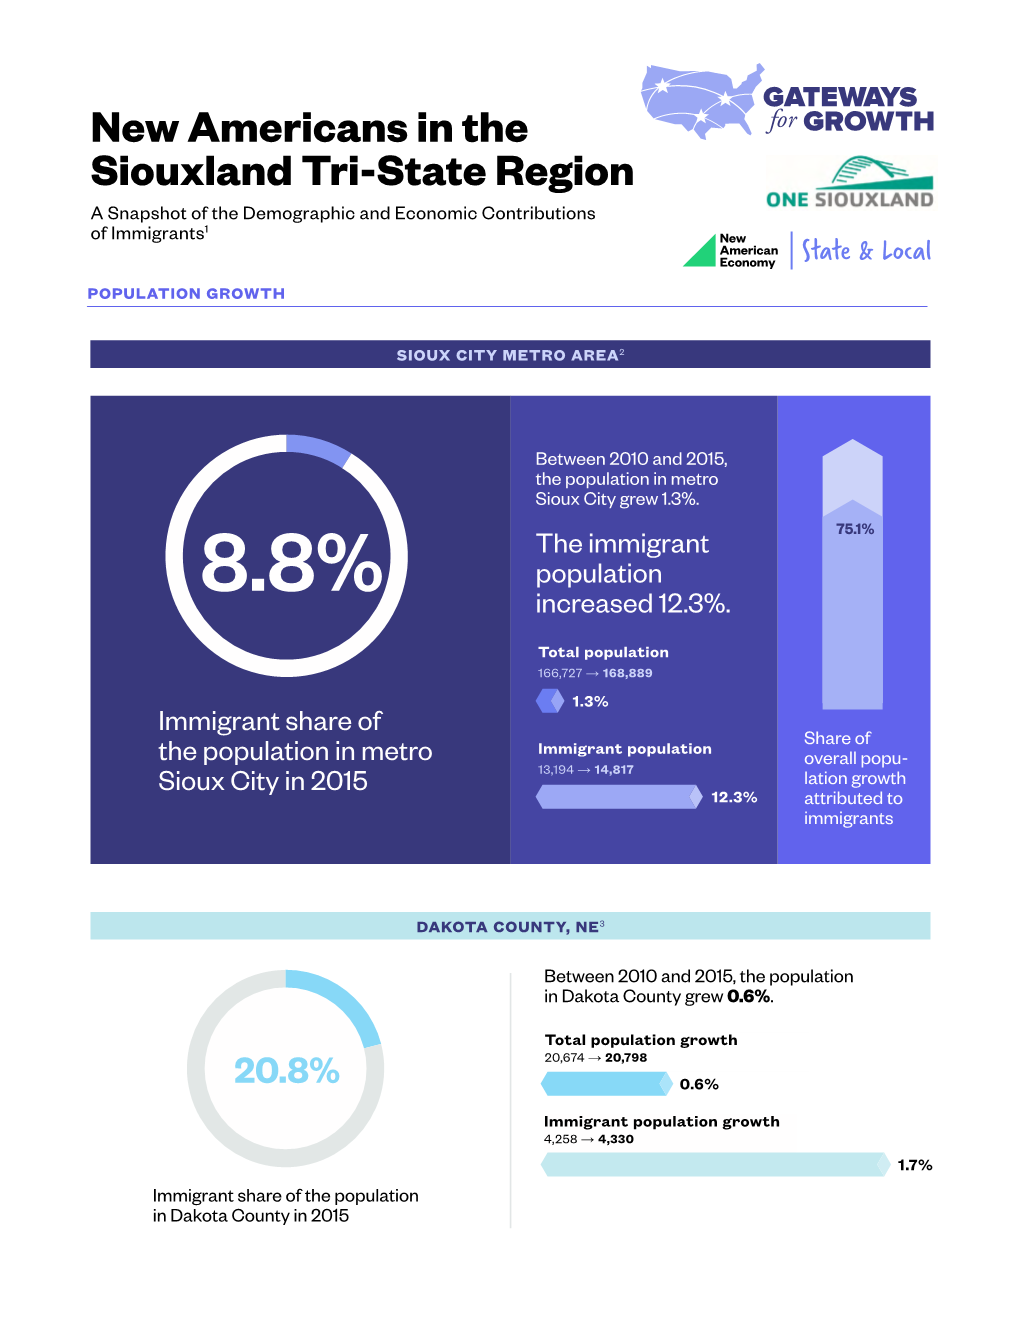 New Americans in the Siouxland Tri-State Region a Snapshot of the Demographic and Economic Contributions of Immigrants1